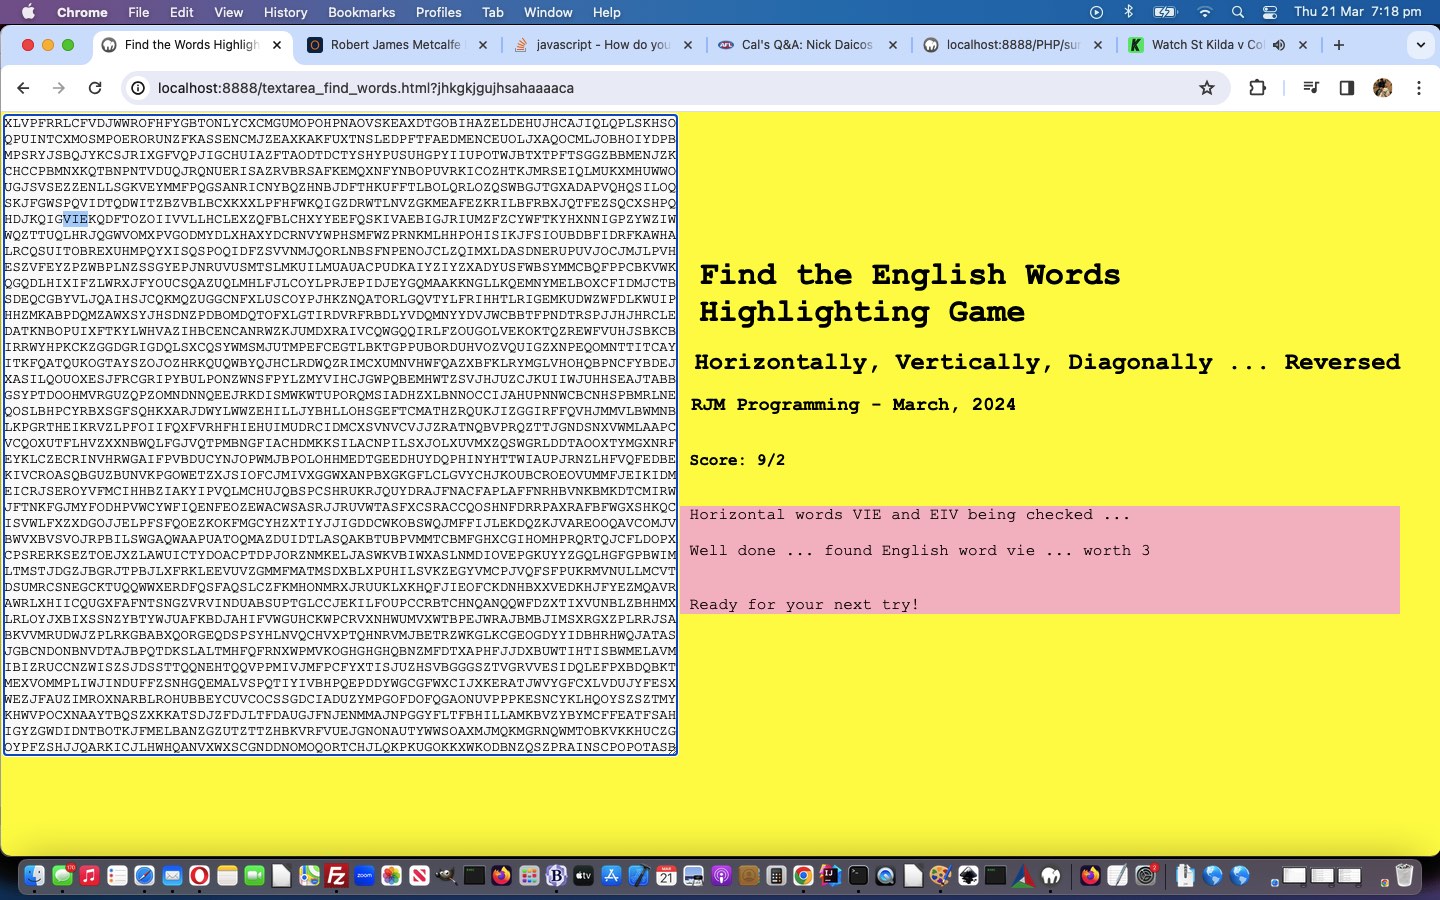 Find English Highlighted Words Game Primer Tutorial